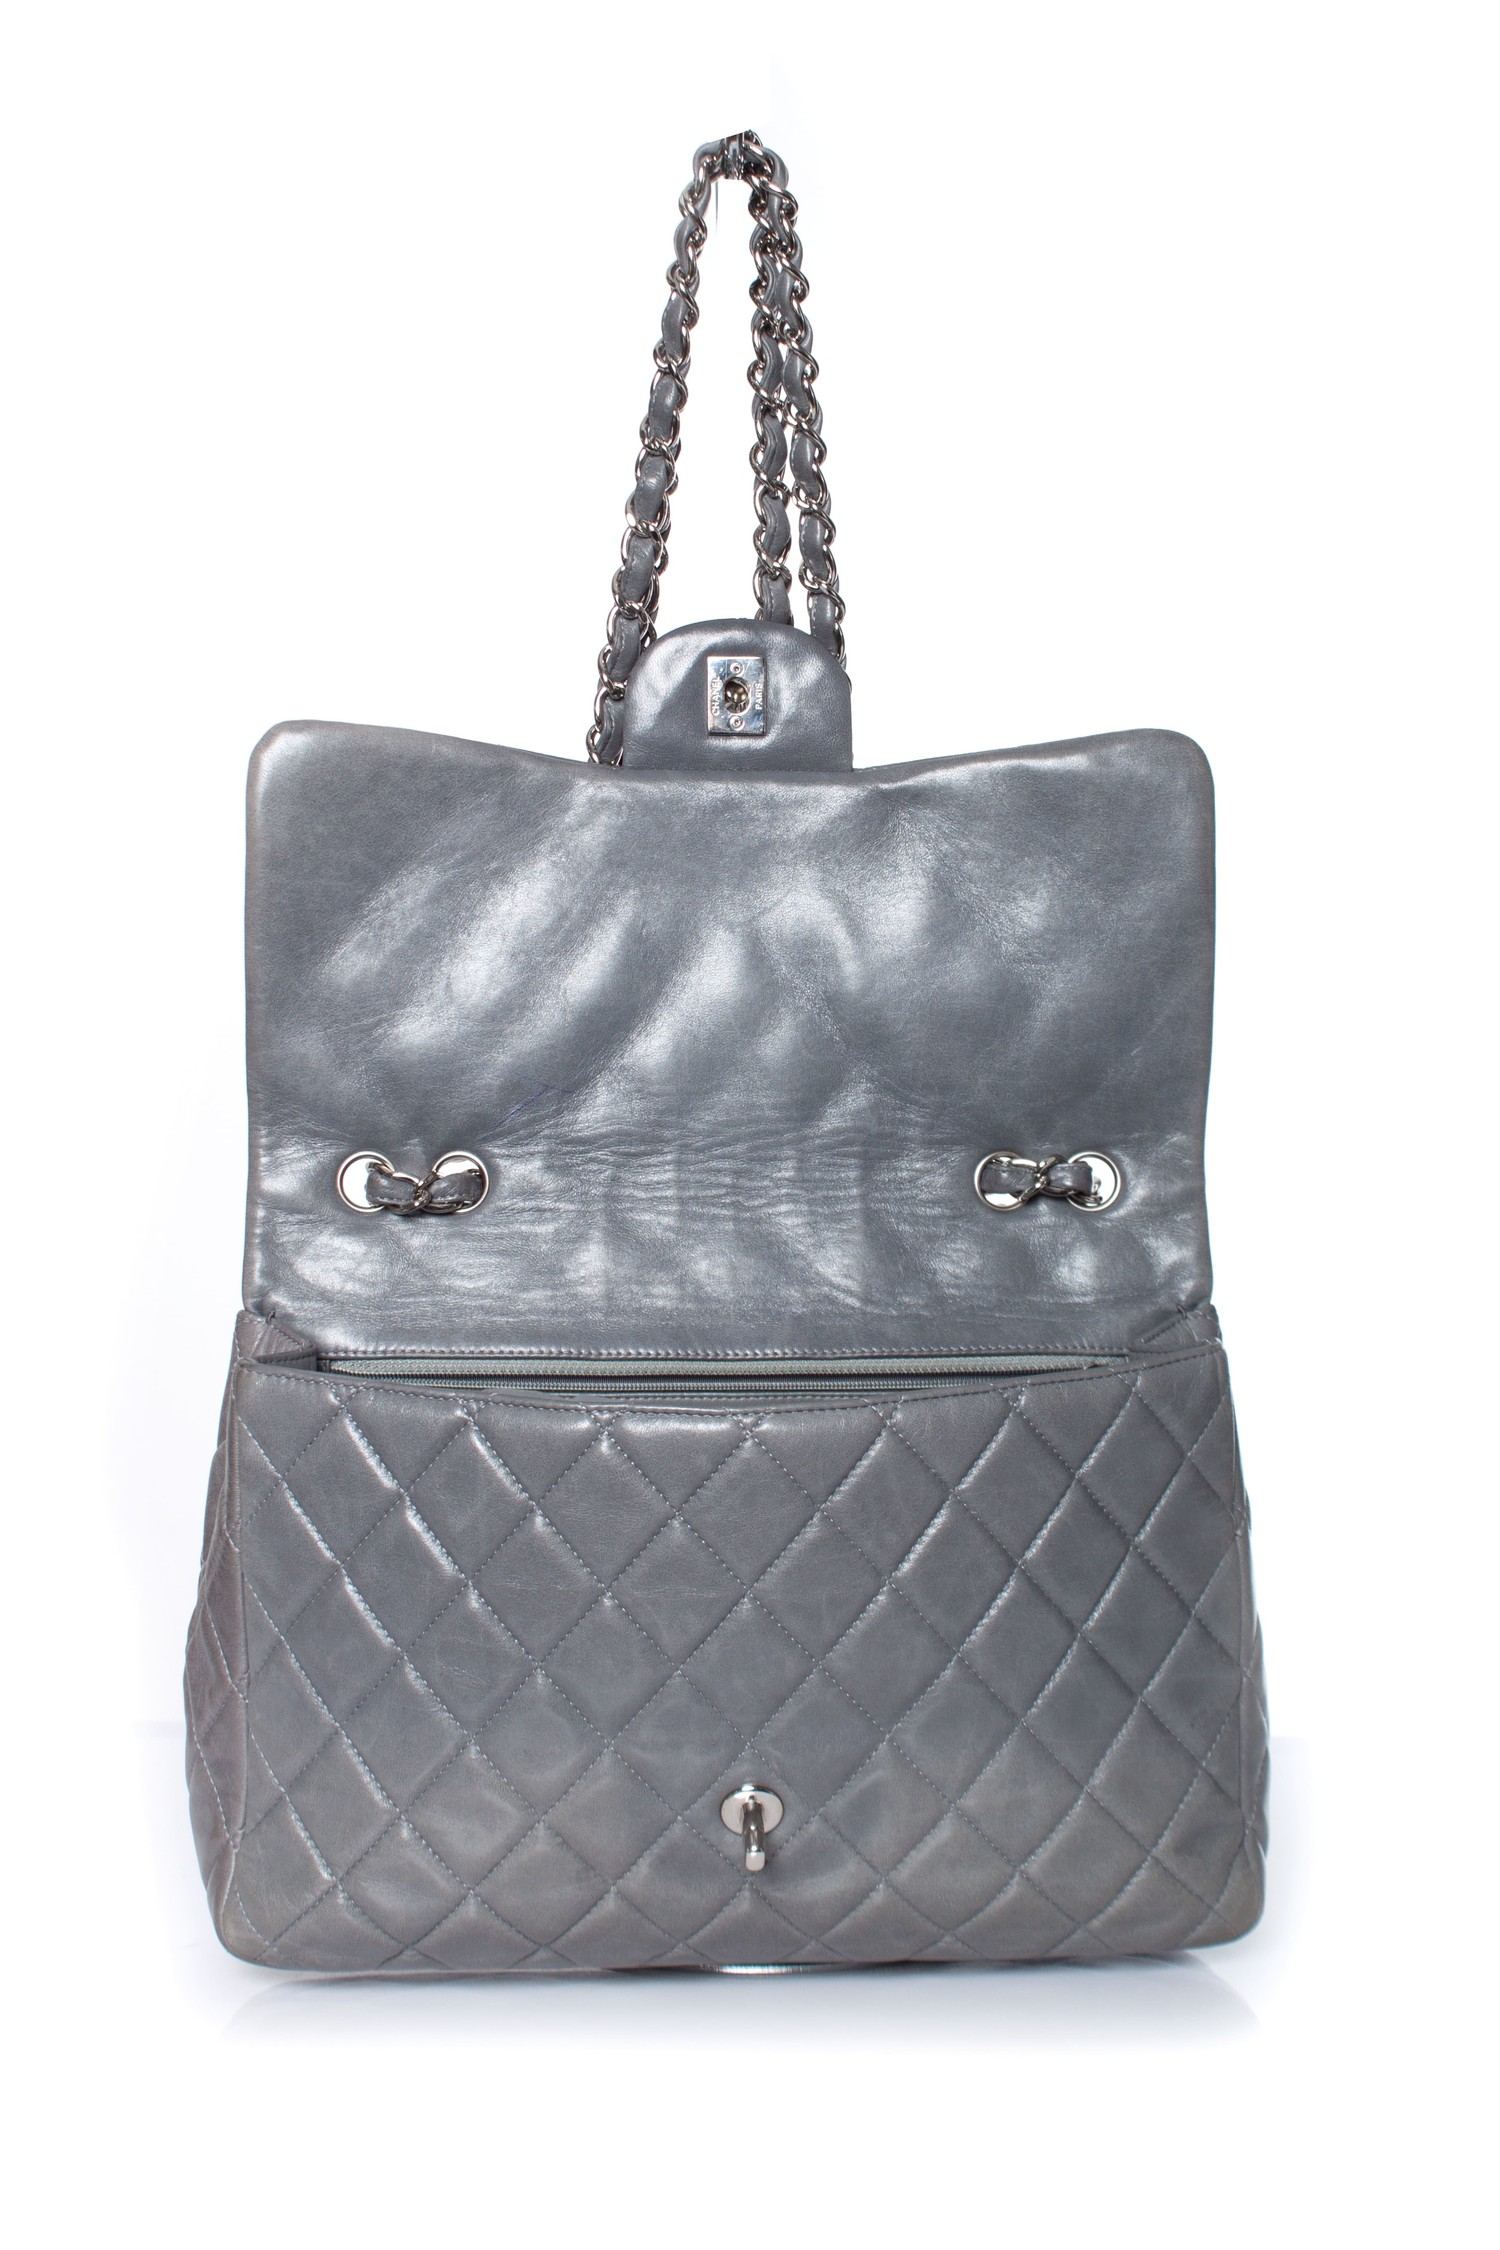 Chanel Black Quilted Calfskin Large Classic Tote Silver Hardware